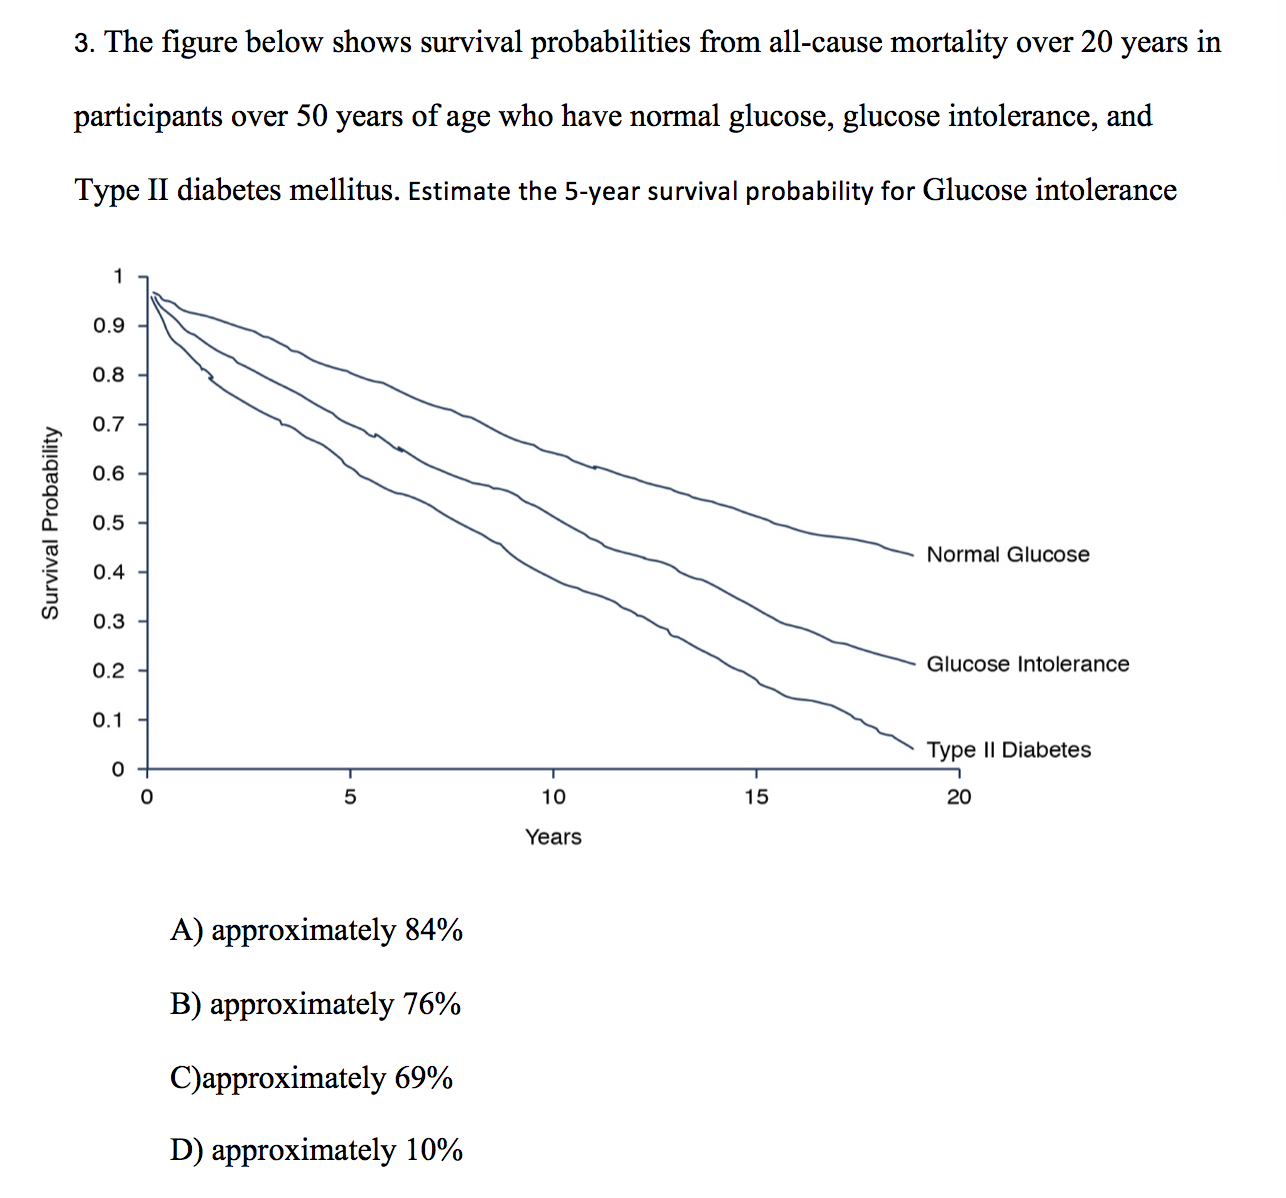 3. The figure below shows survival probabilities from all-cause mortality over 20 years in
participants over 50 years of age who have normal glucose, glucose intolerance, and
Type II diabetes mellitus. Estimate the 5-year survival probability for Glucose intolerance
